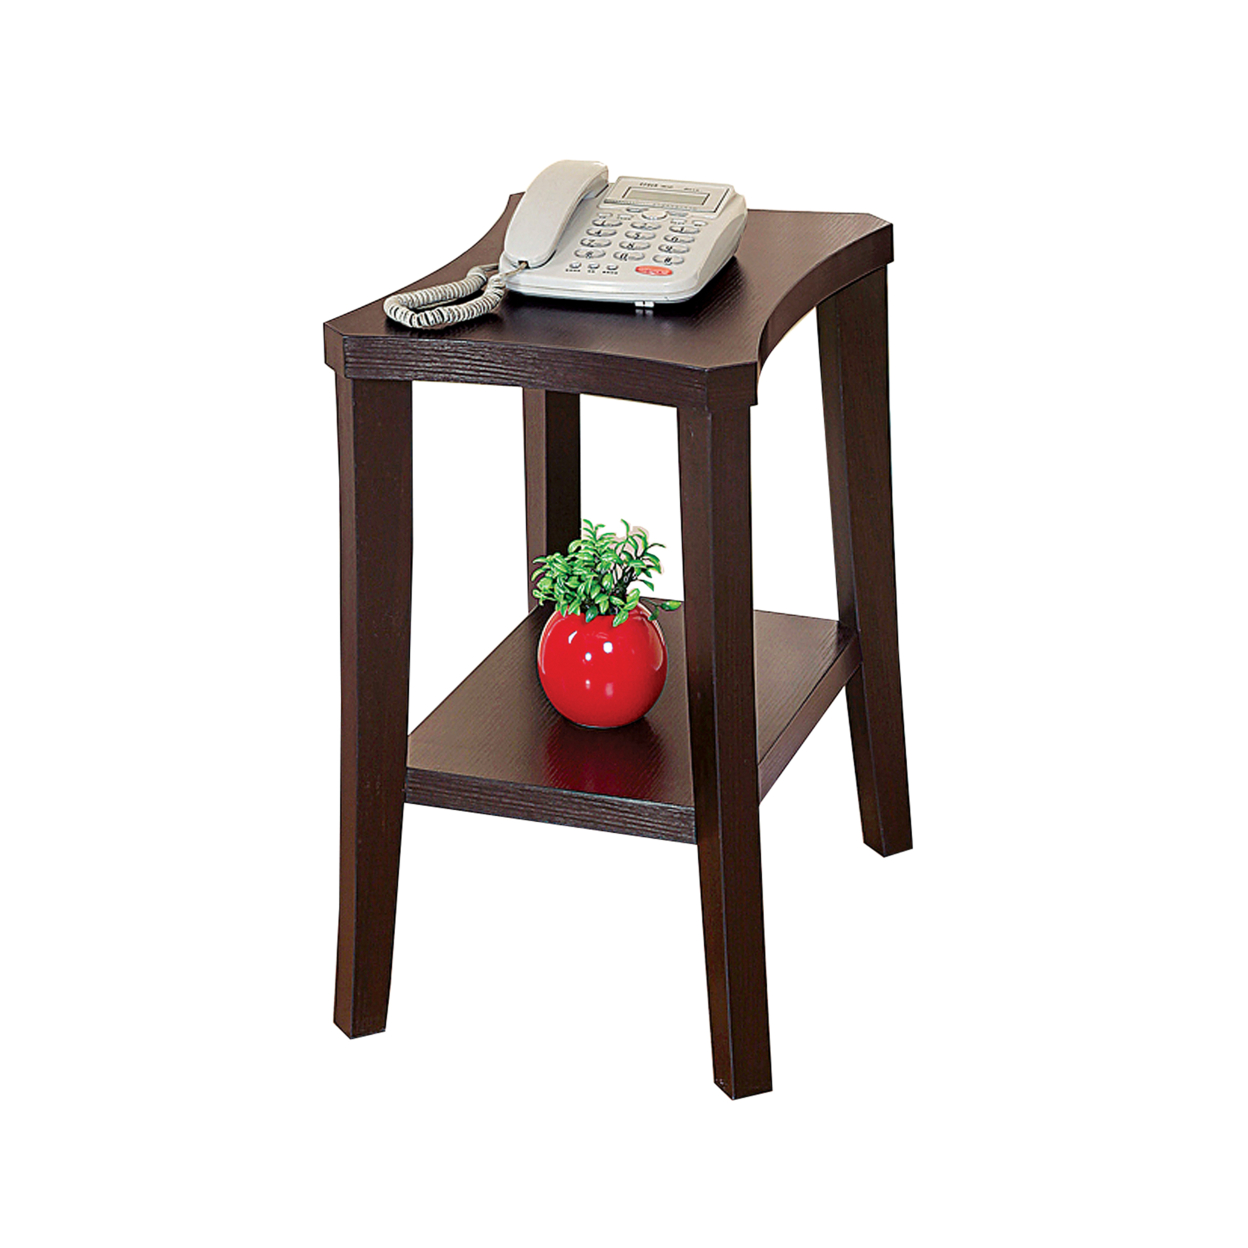 24 Inch Wood And Melamine Chairside Table, Curved Top, 1 Shelf,Cocoa Brown- Saltoro Sherpi